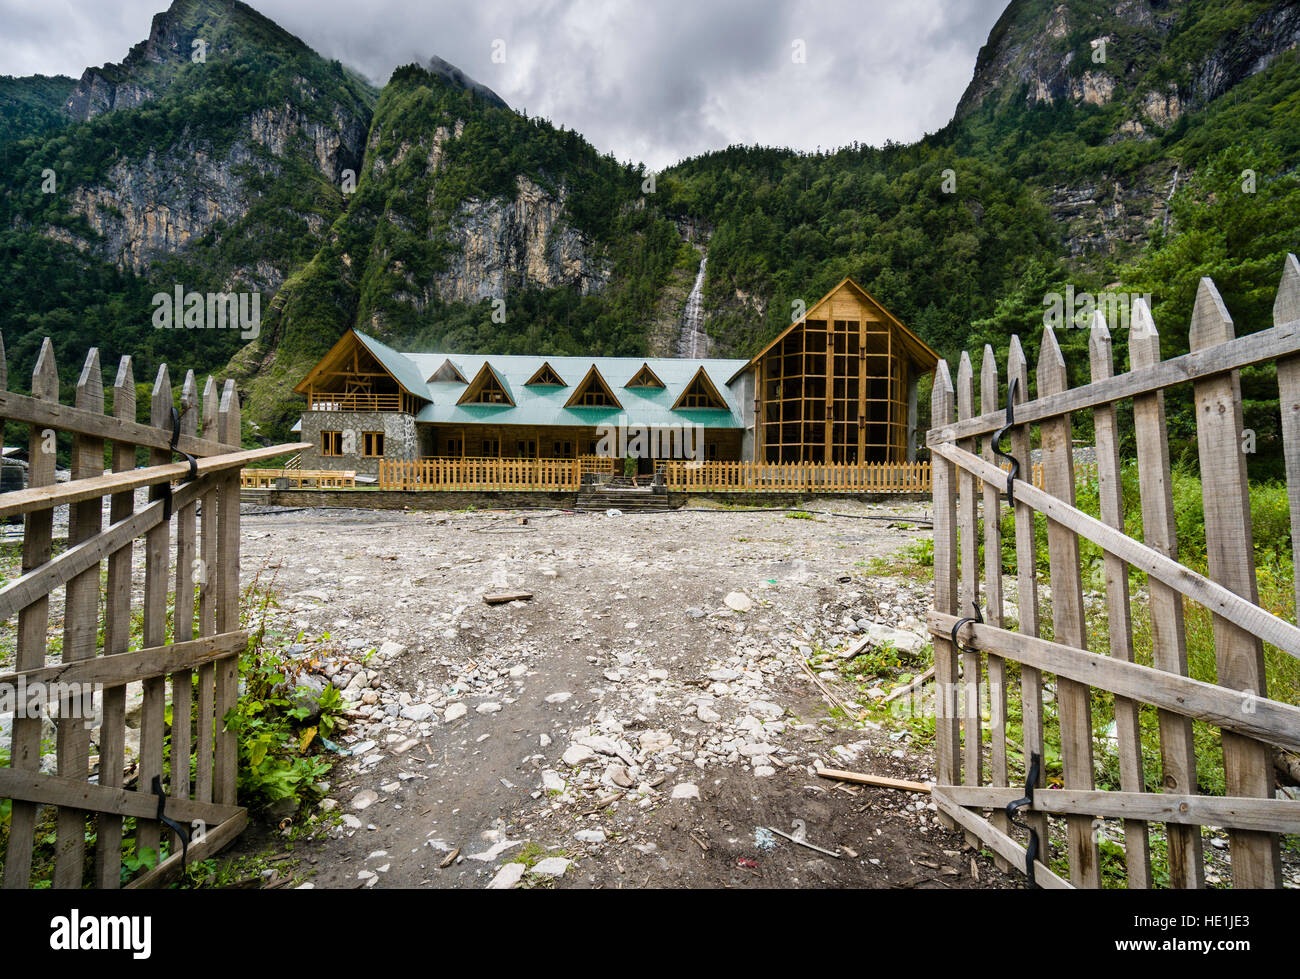 Construction of a luxurious hotel near a apple orchard in Upper Marsyangdi valley Stock Photo